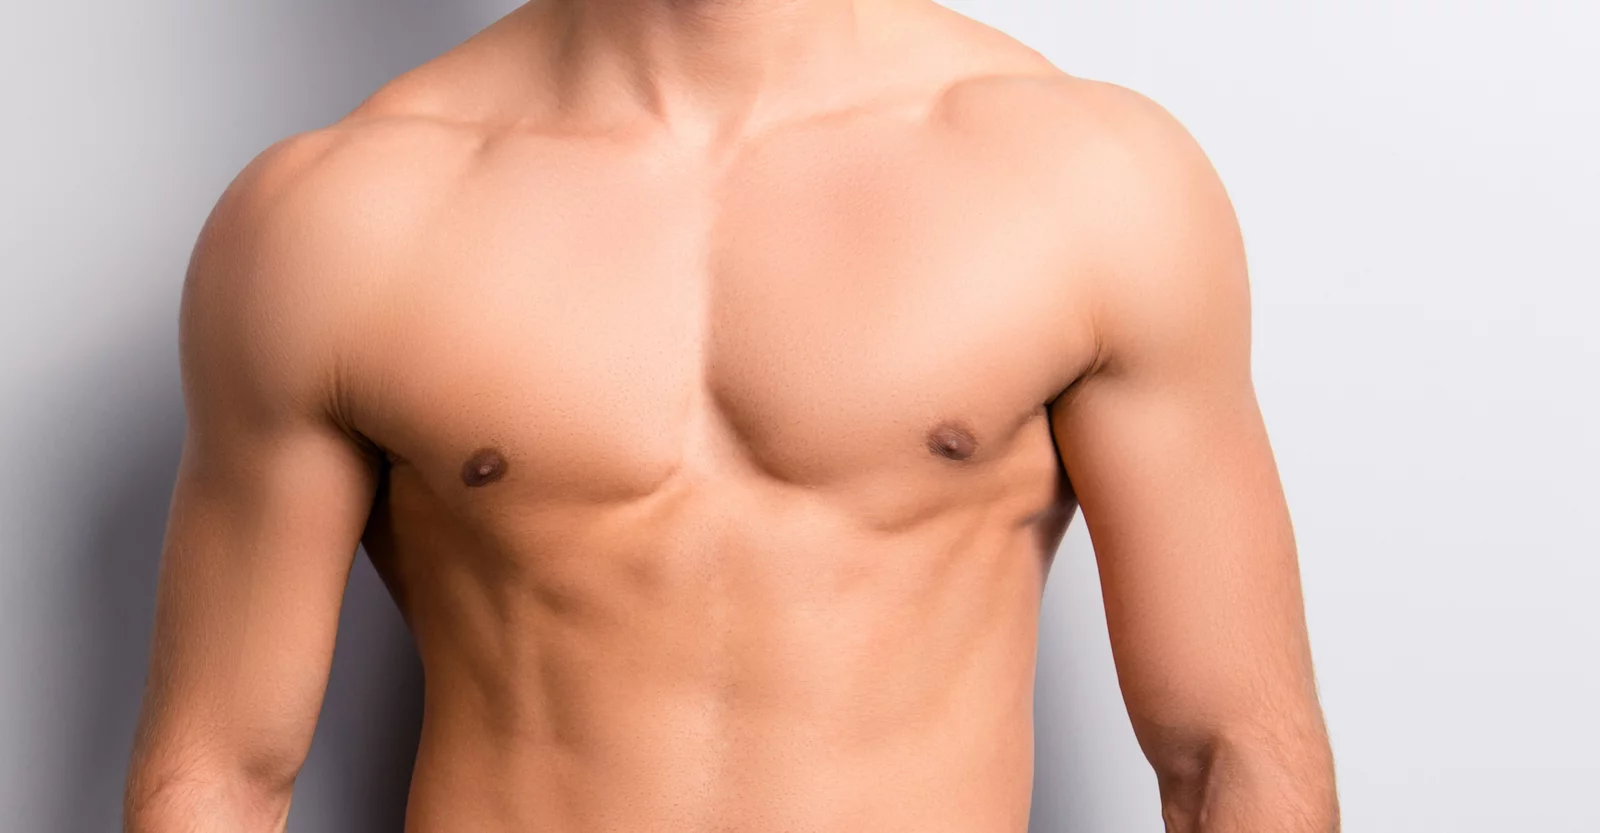 Keeping Abreast of the Latest Non-Surgical Treatment for “Man Boobs”